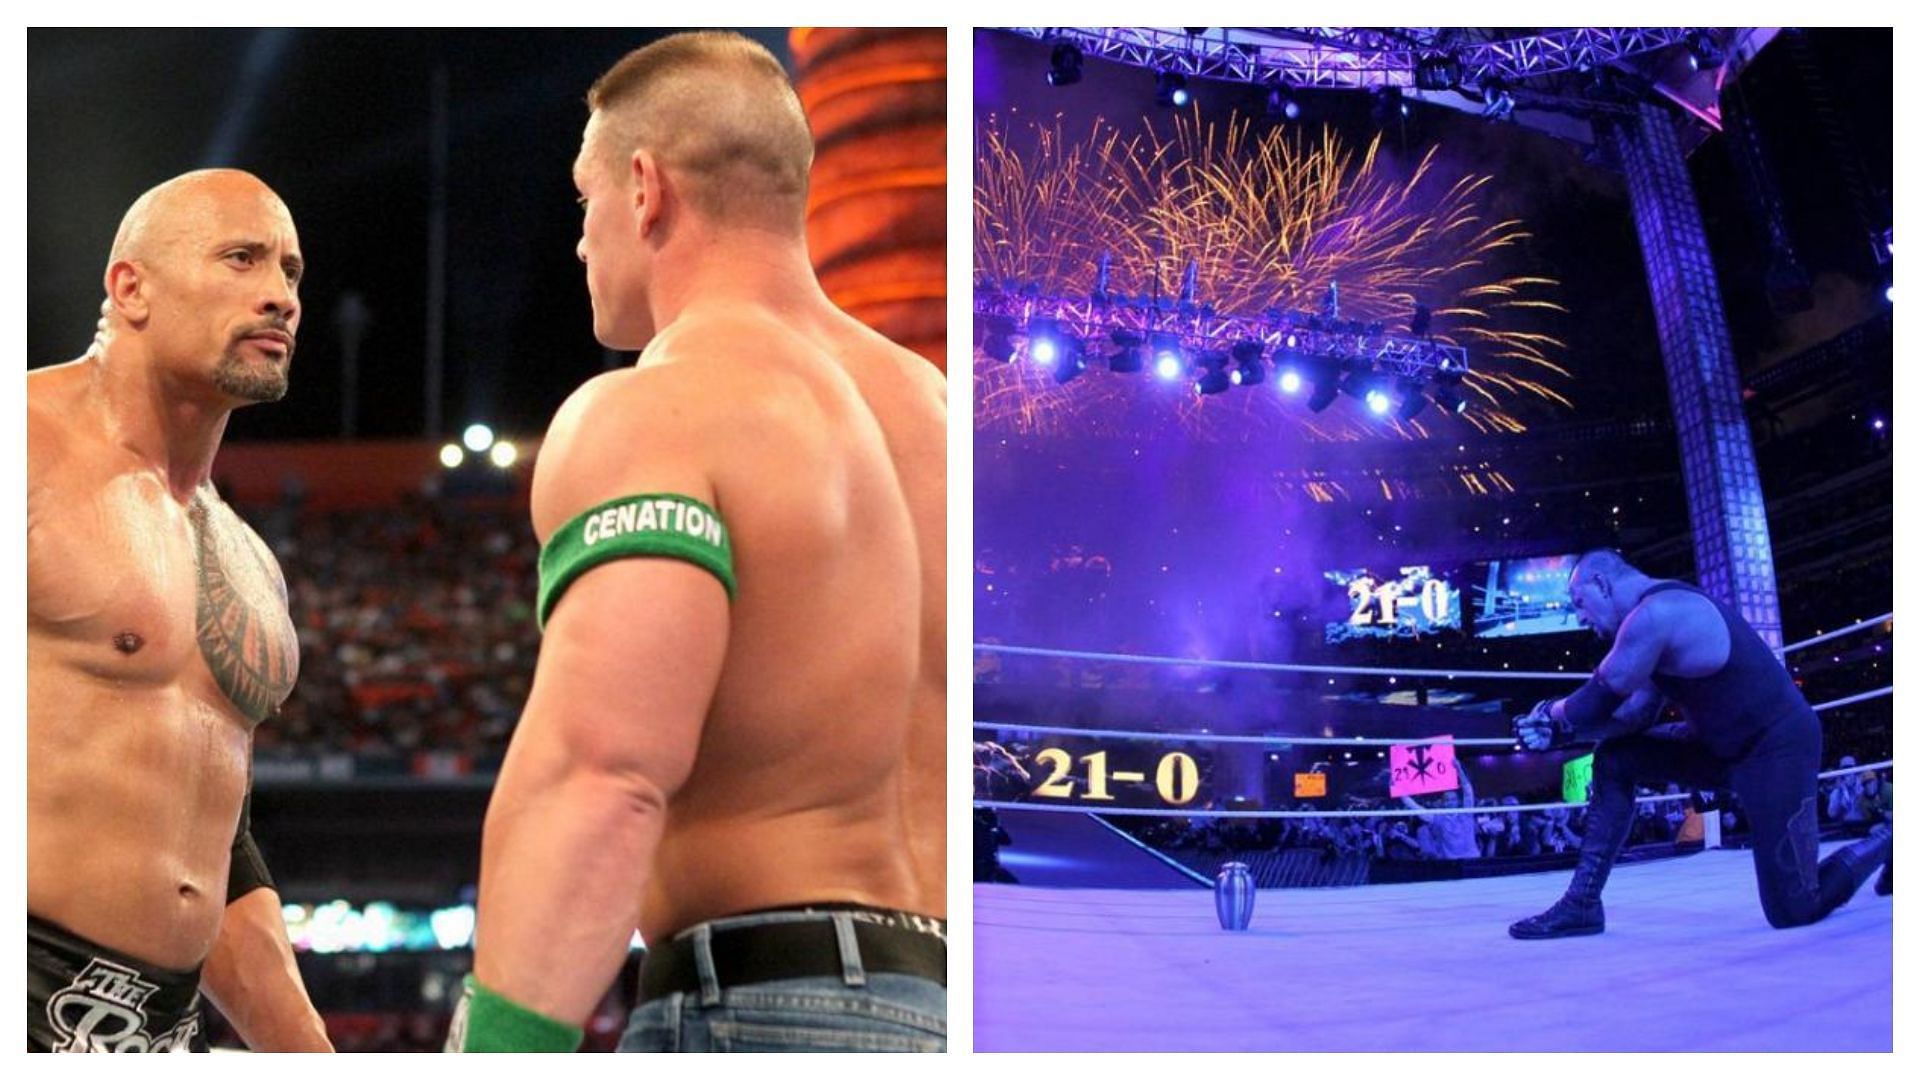 Many legends have reached the pinnacle of WWE at WrestleMania